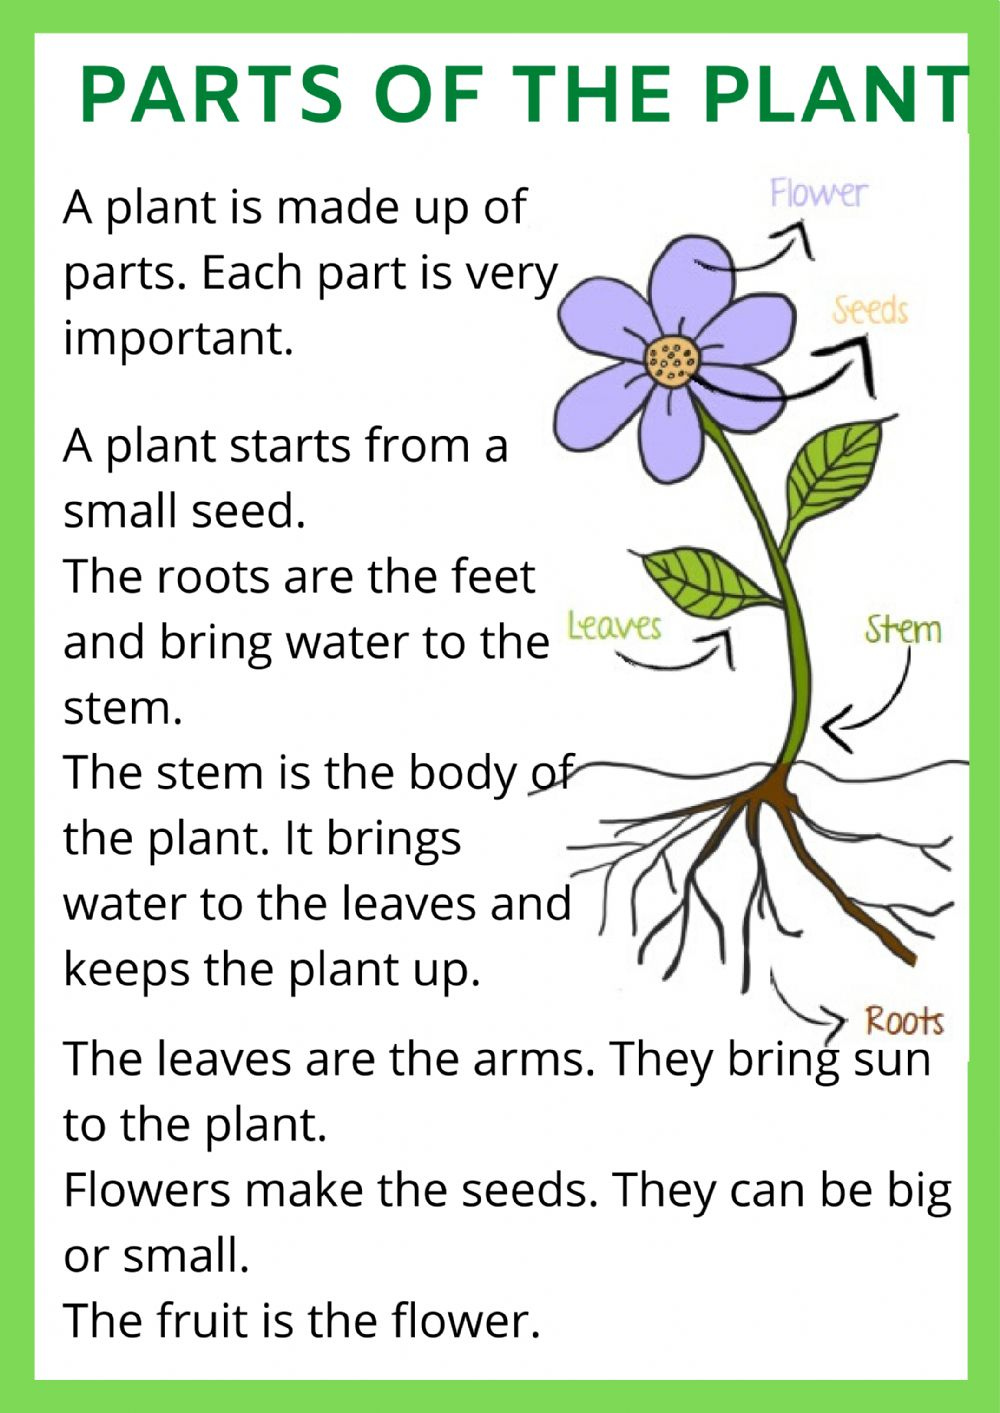 Parts Of The Plant Interactive Worksheet For 1ST GRADE